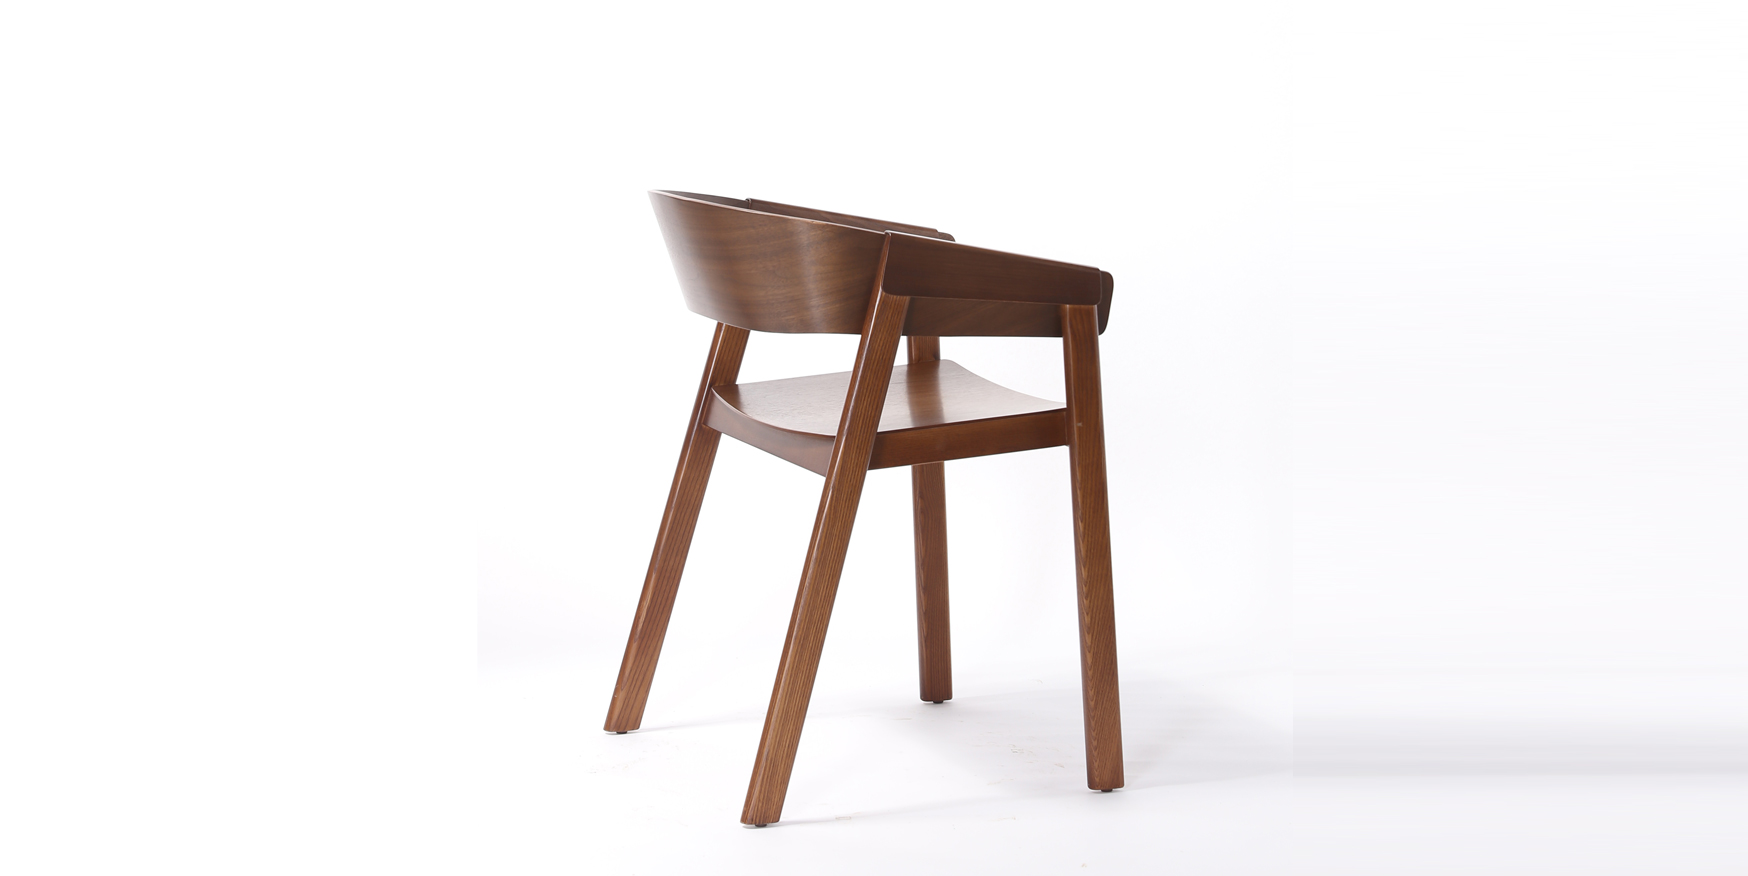 C3 Dining Chair Modern Nordic Wooden Chair Plywood Chair Bentwood Chair Arm Chair